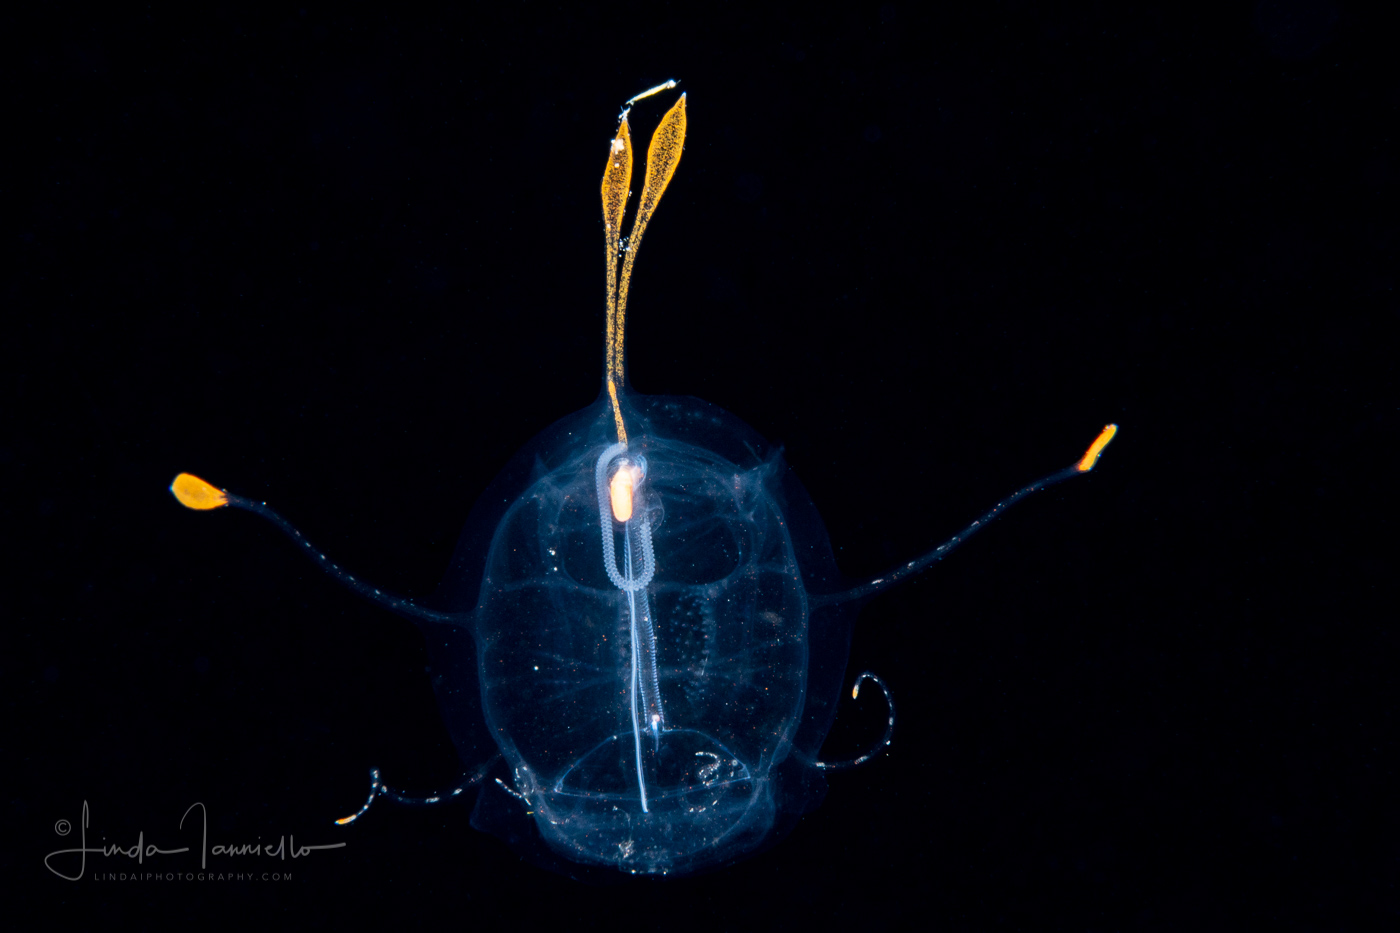 Planktonic Tunicate - Salp - Traustedtia multitentaculata with Tunic Projections